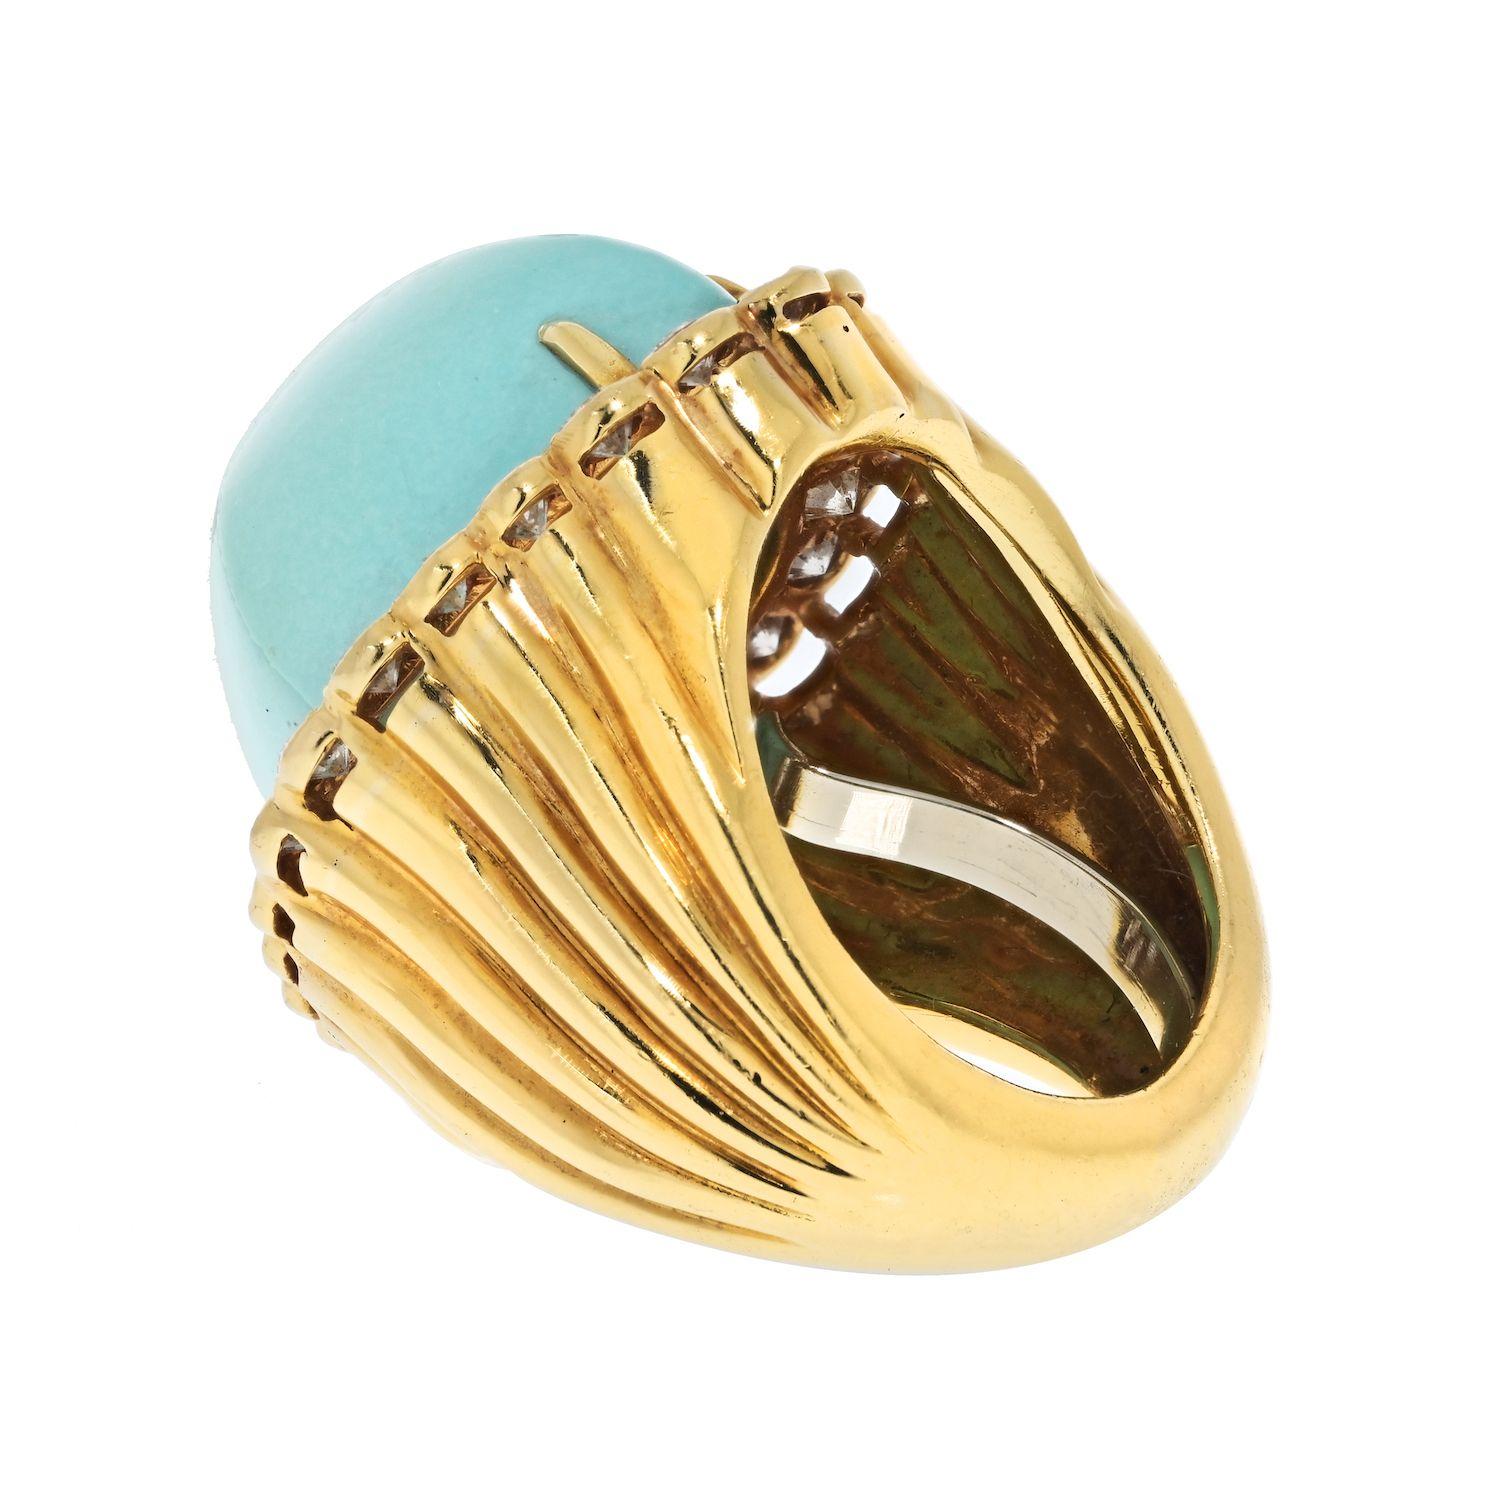 The vintage David Webb platinum and 18K yellow gold rhombus-shaped cabochon turquoise ring is a true masterpiece that encapsulates the essence of timeless design. Created in the 1980s, this ring showcases exceptional craftsmanship and a unique blend